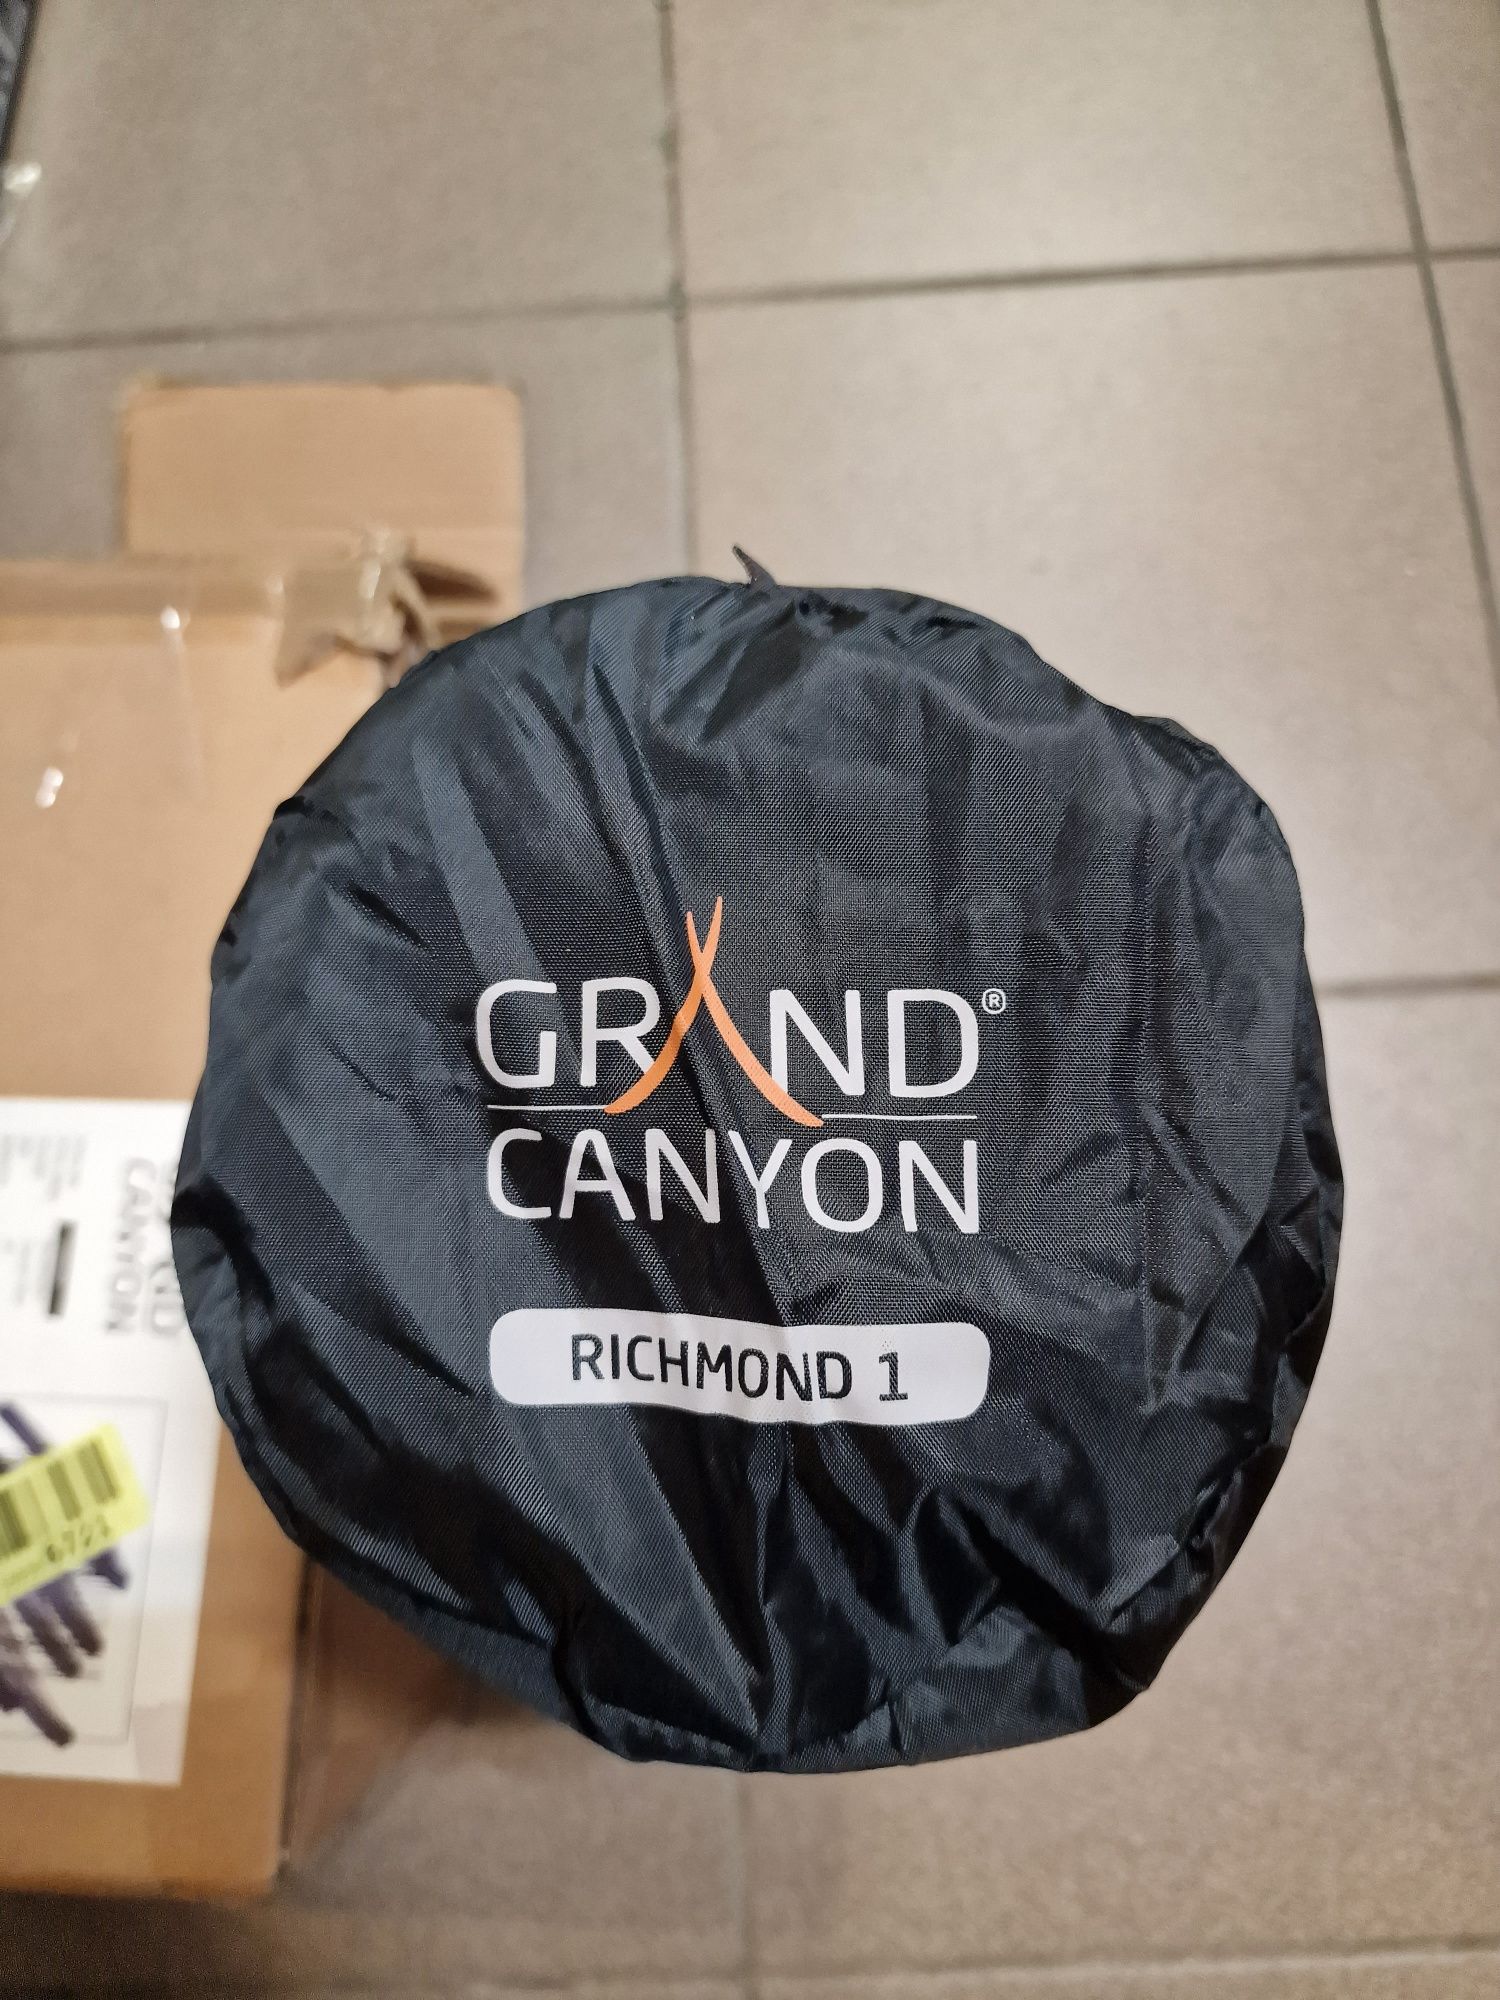 Namiot jednoosobowy Grand Canyon Richmond 1